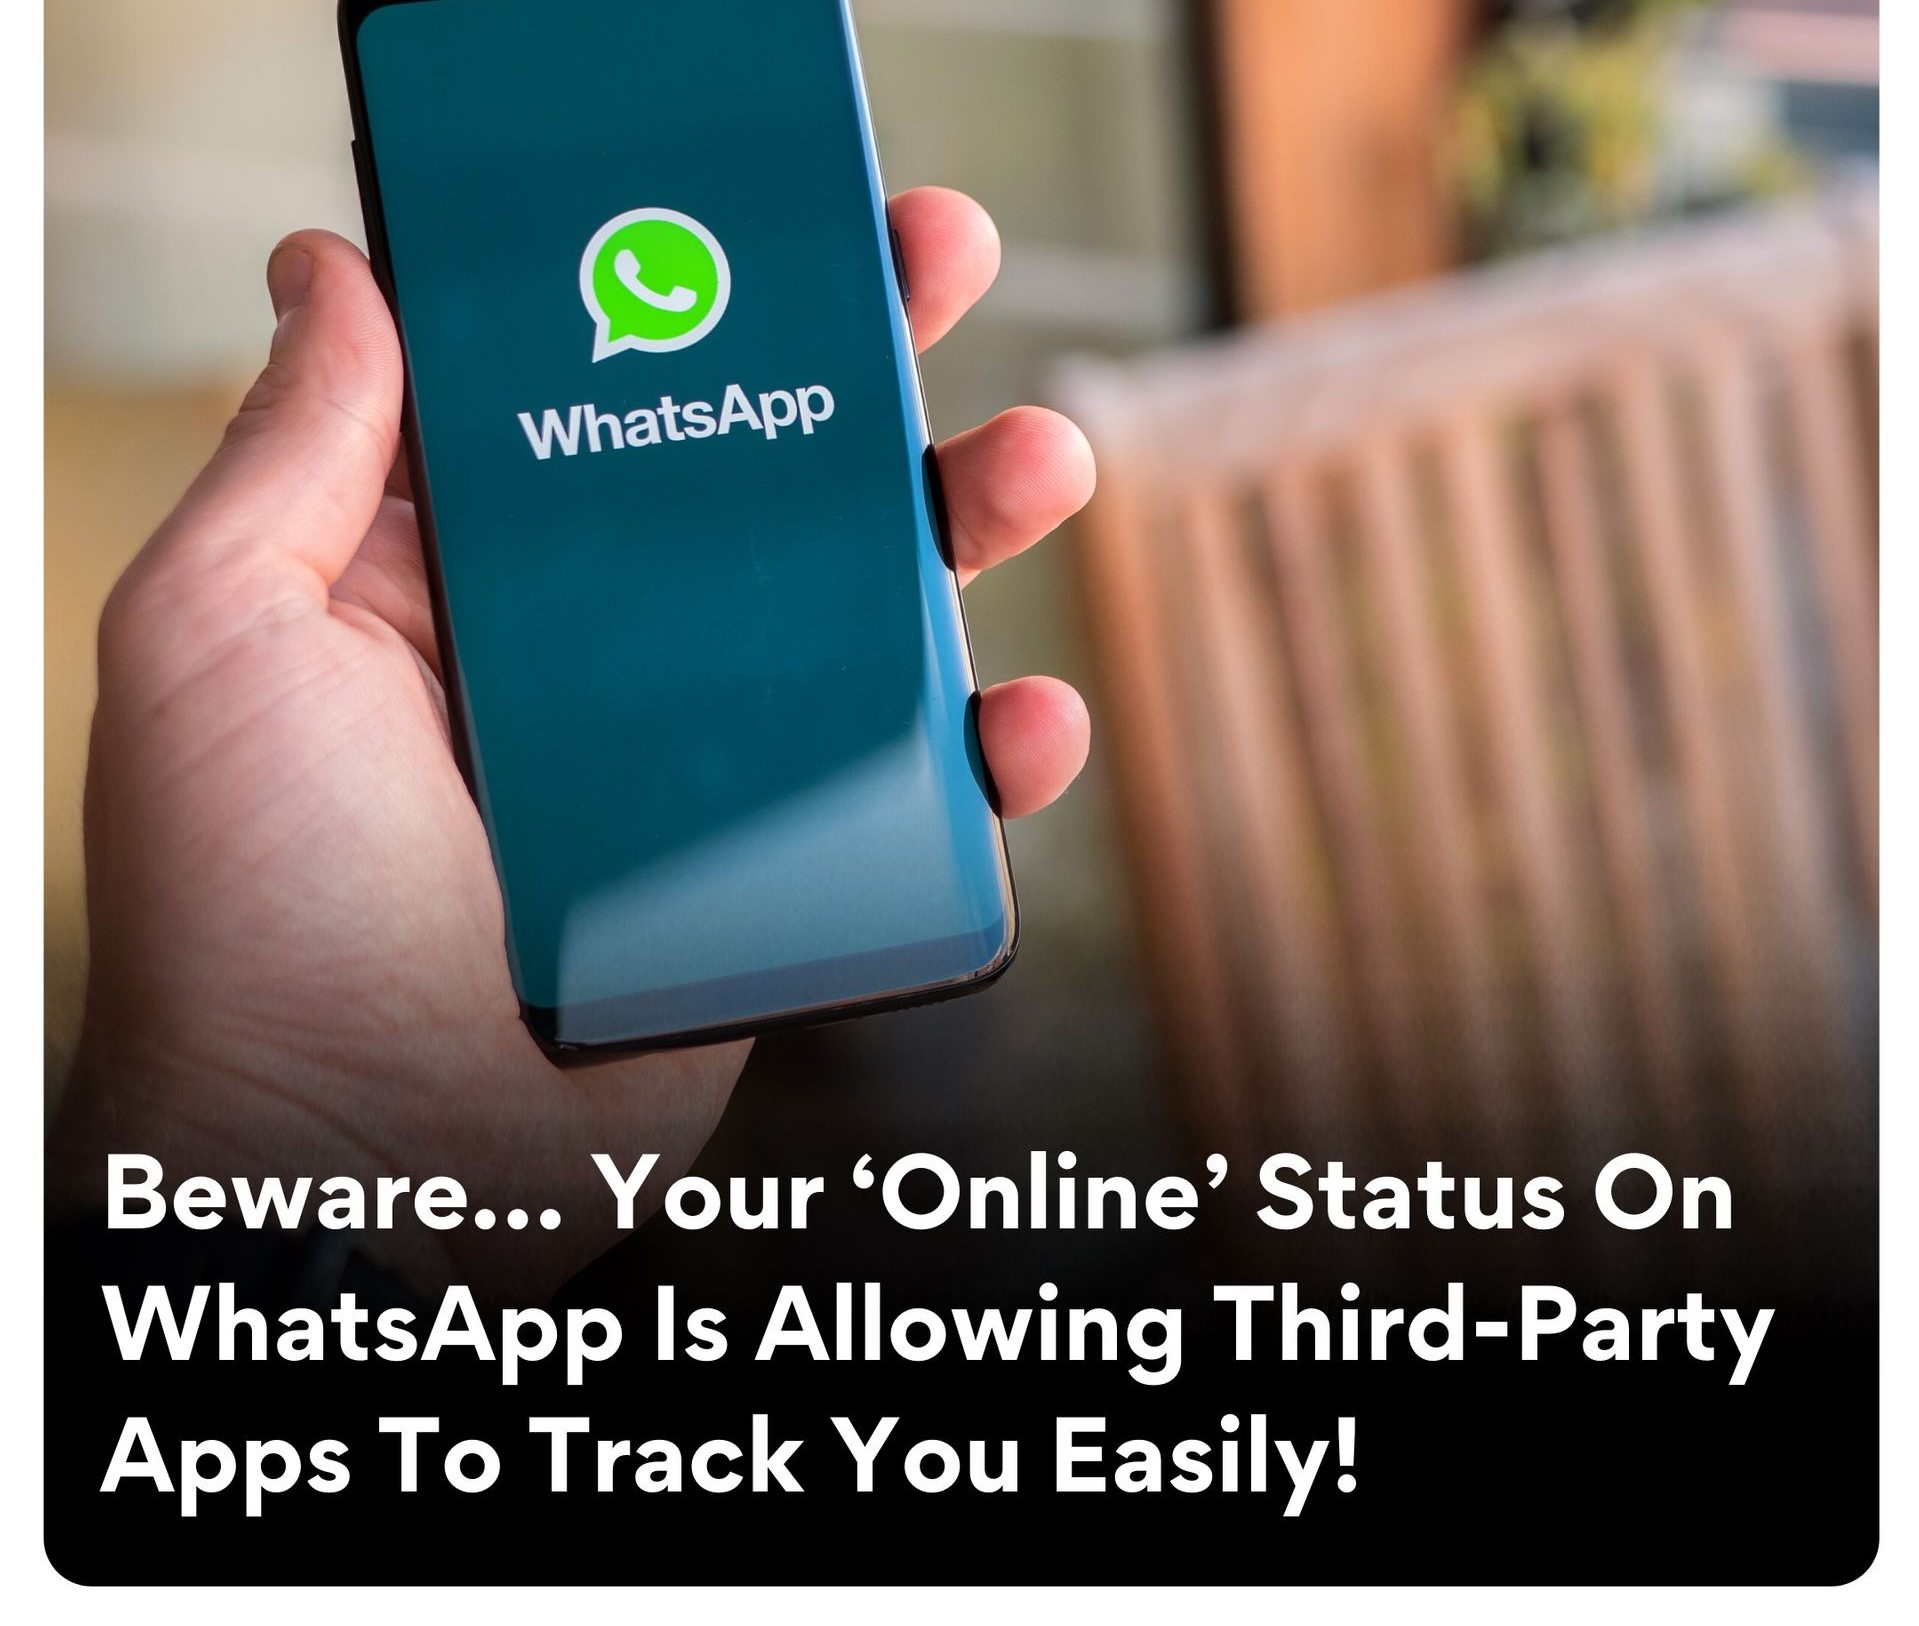 WhatsApp is allowing third party apps to track you easily